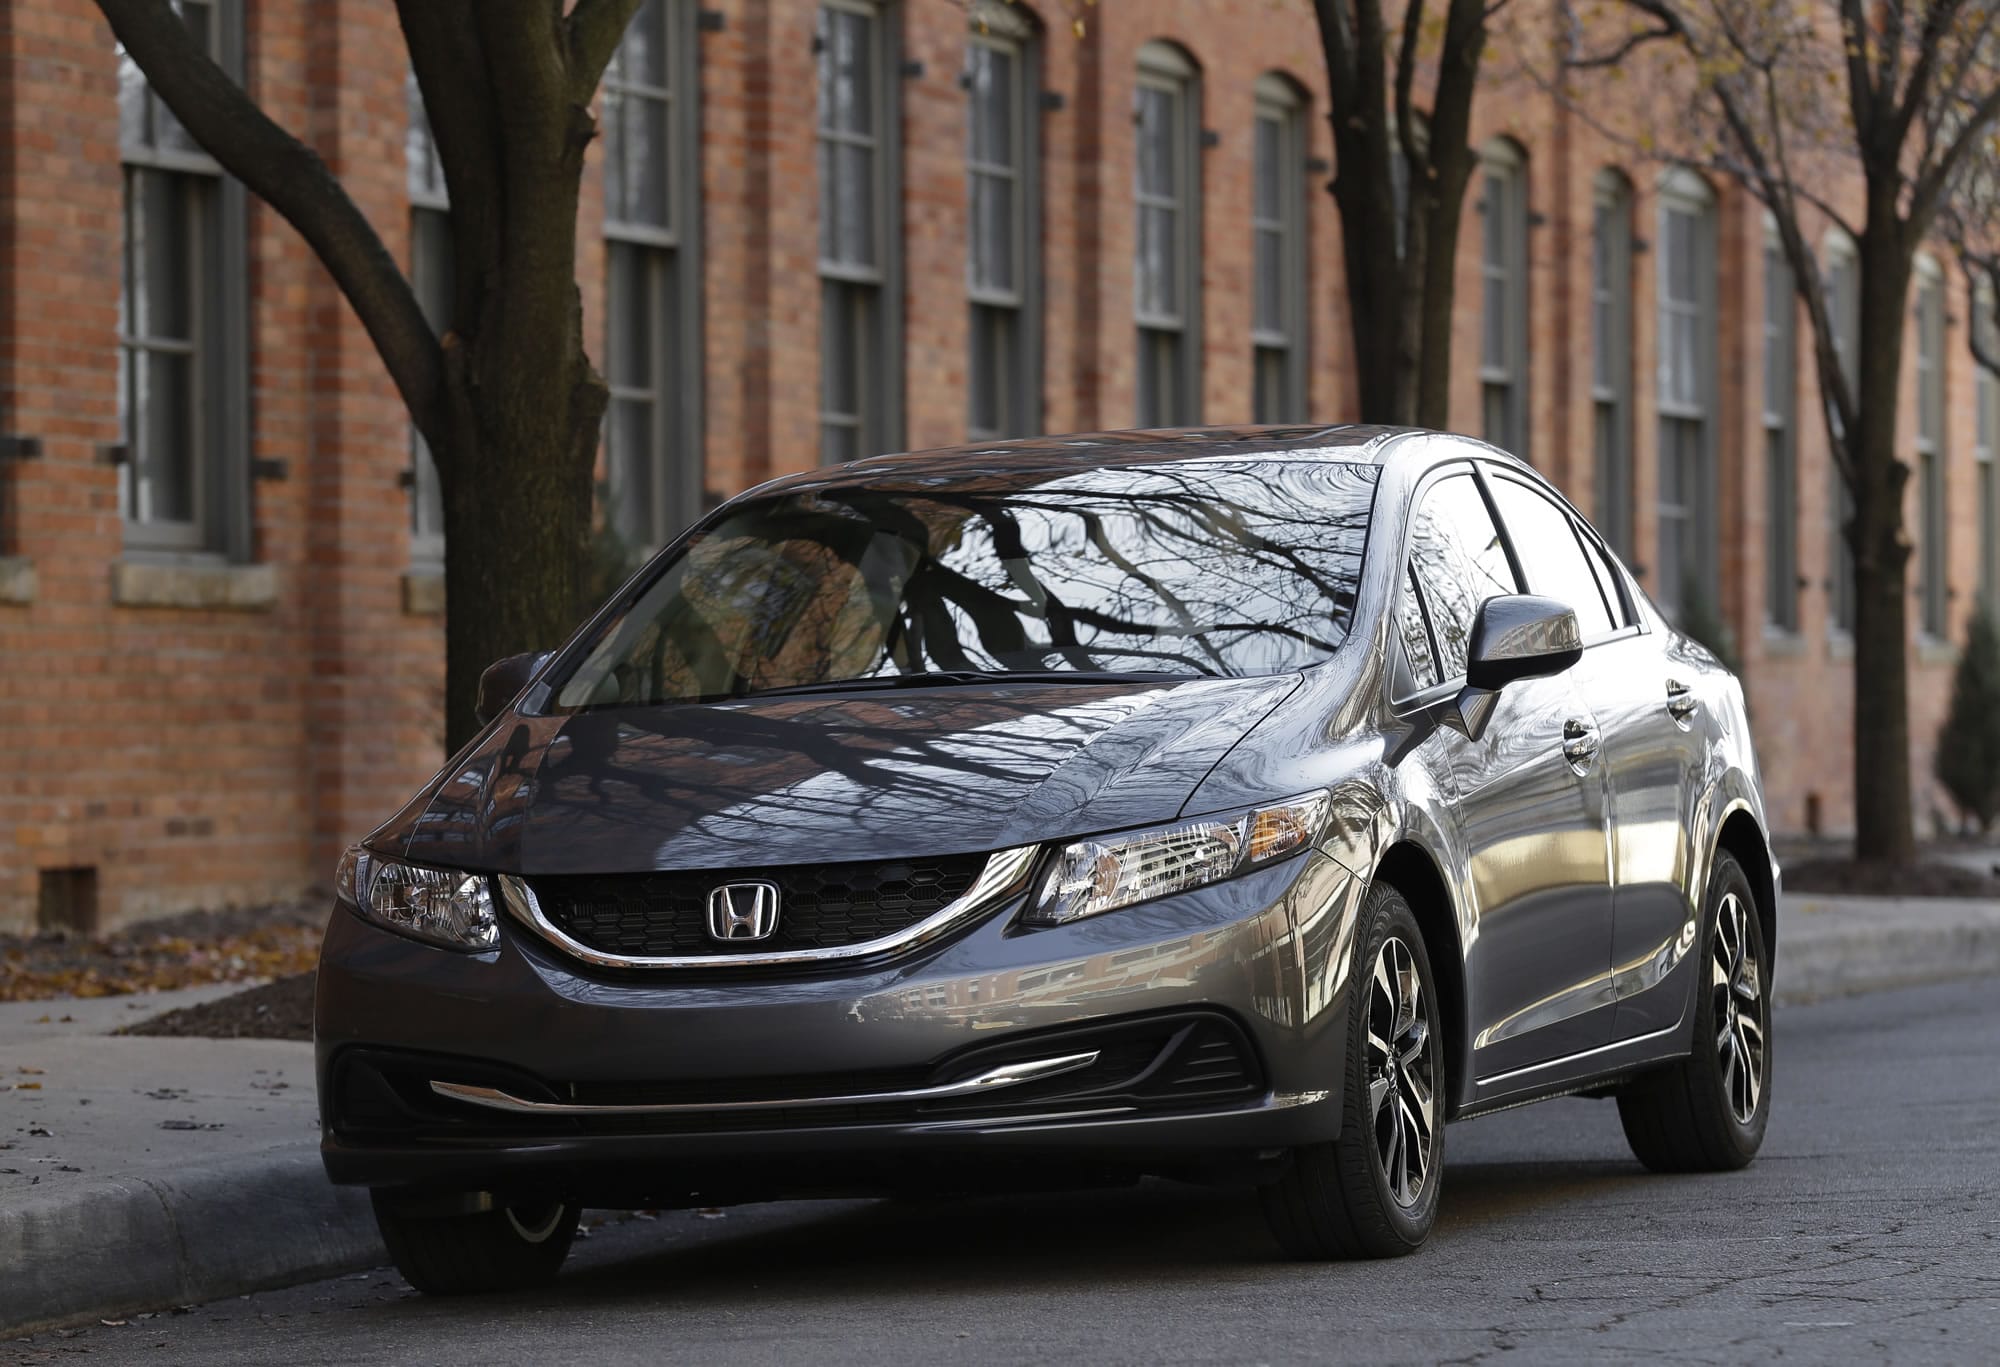 Associated Press files
In a new survey of U.S. car owners, Honda had the top-performing small car with the Honda Civic.